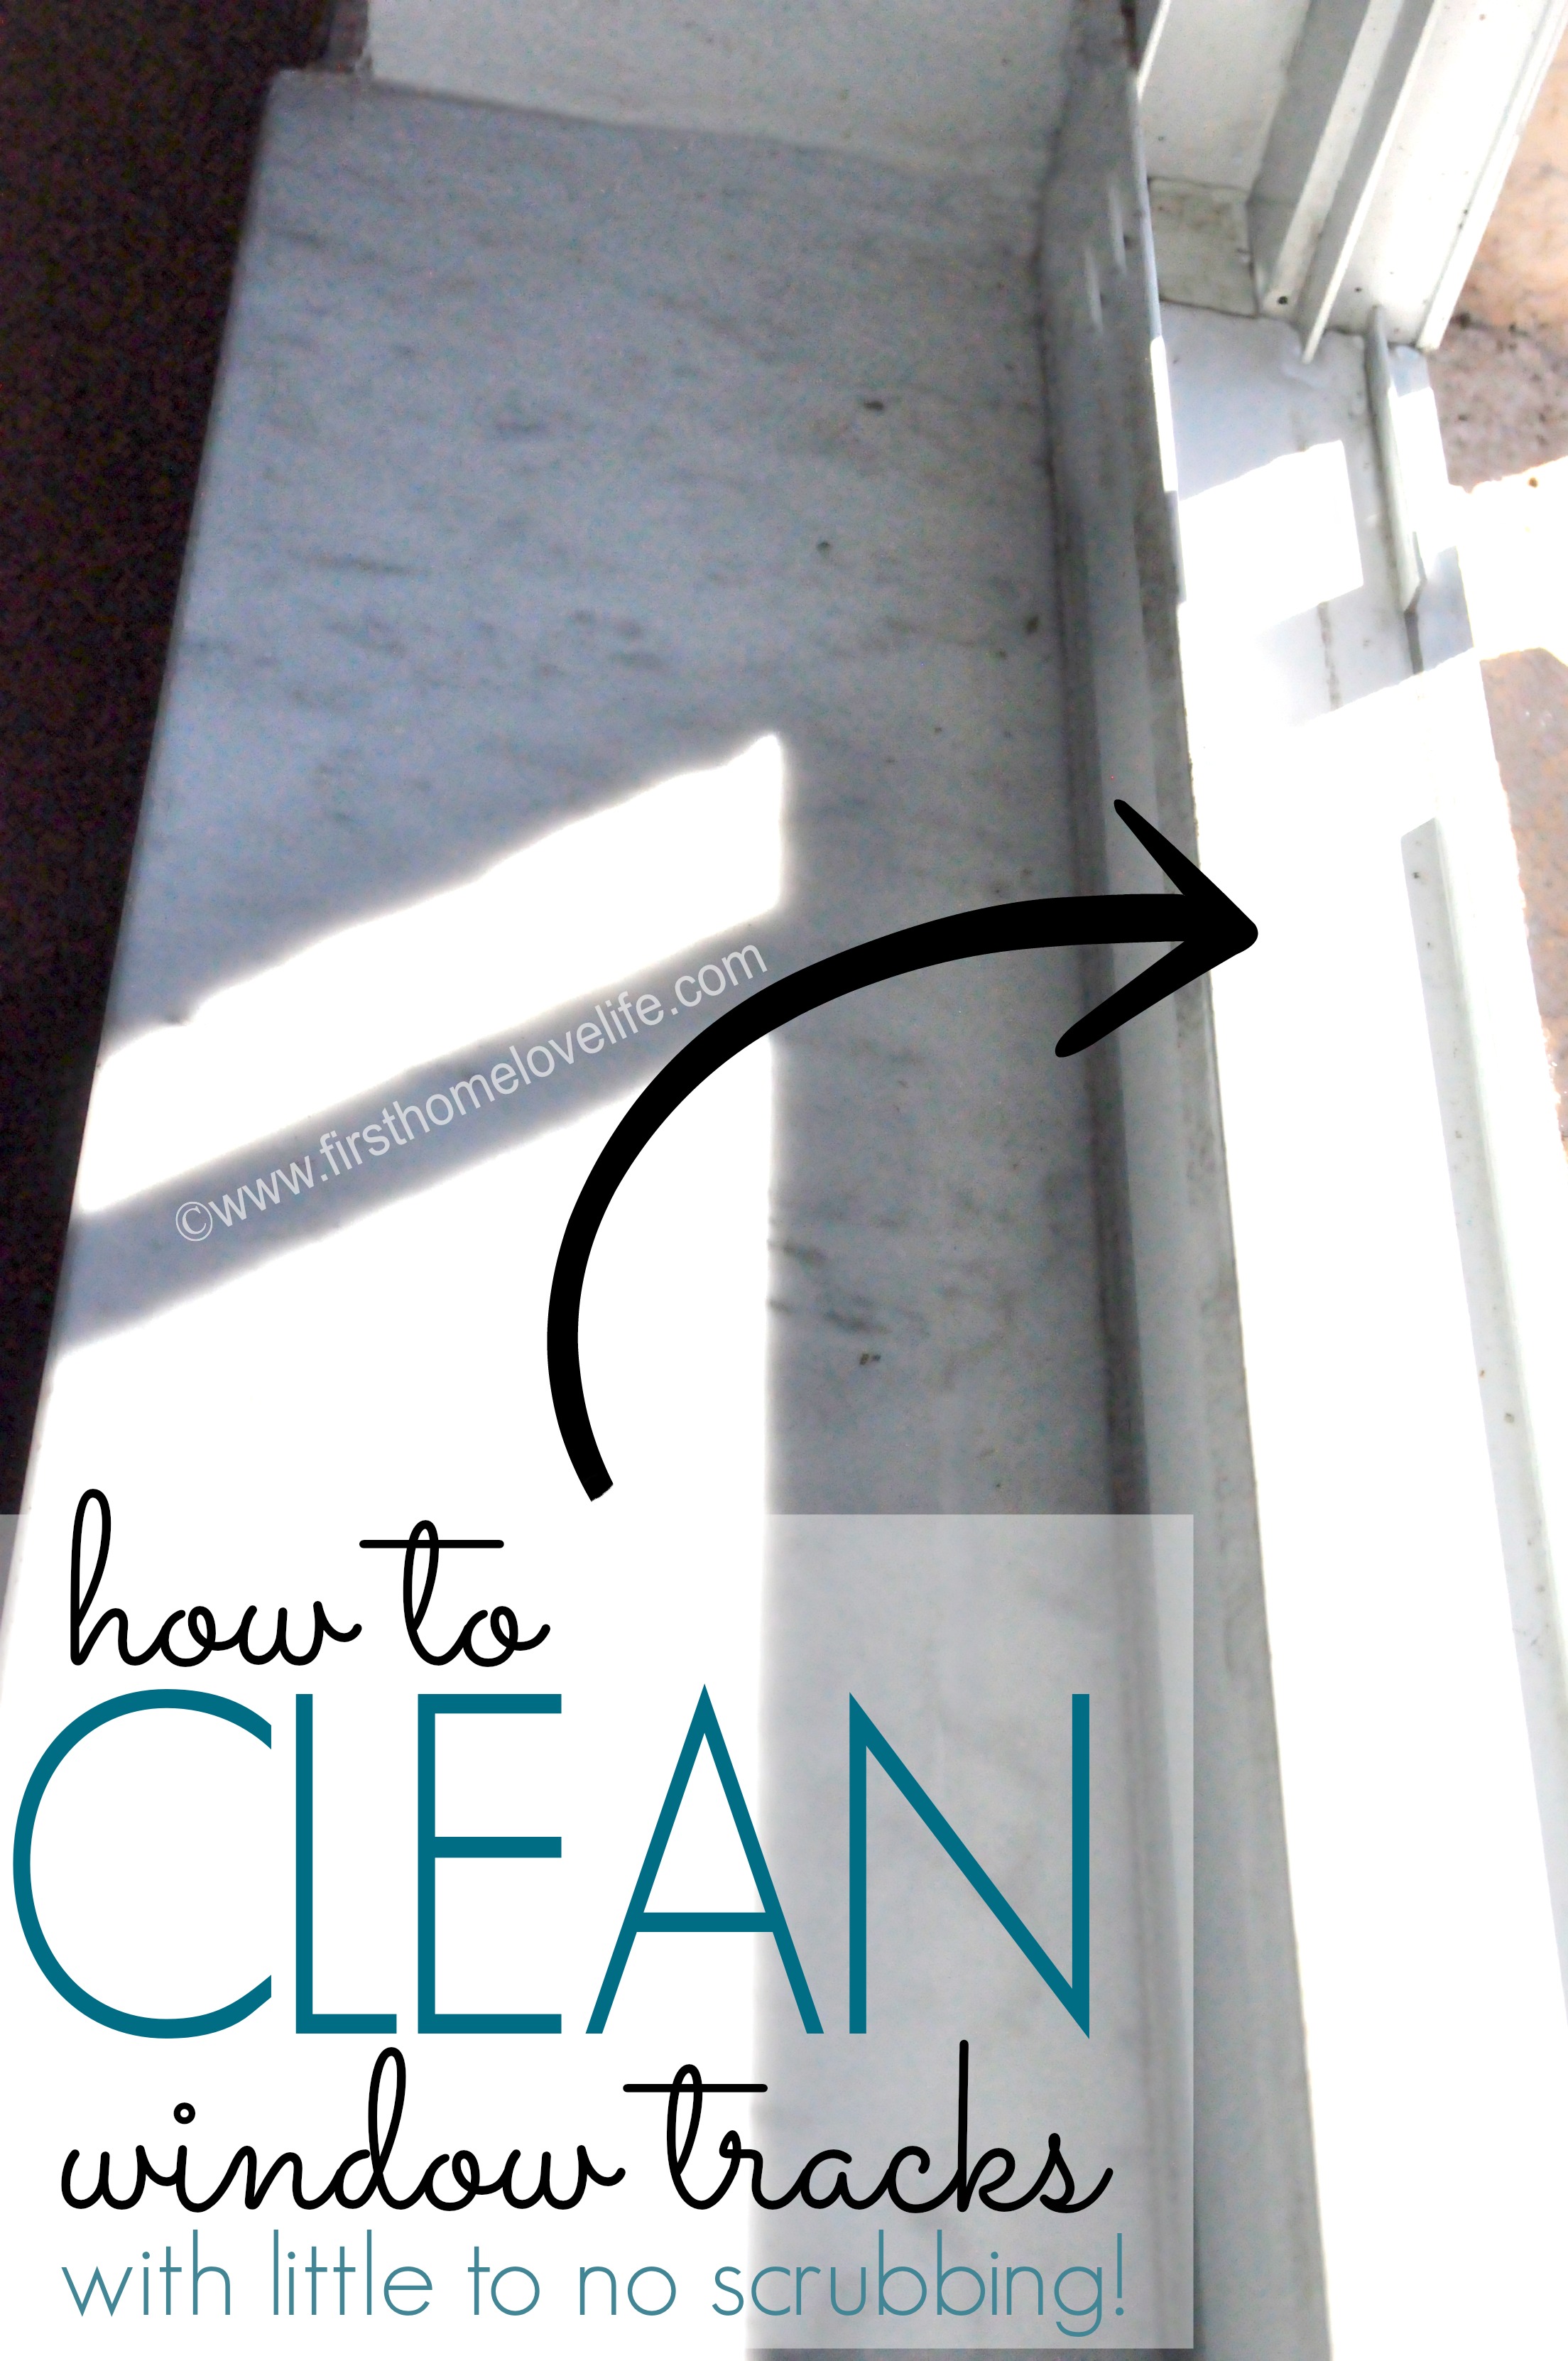 Clean Those Window Sills & Tracks! Knowing how to clean window